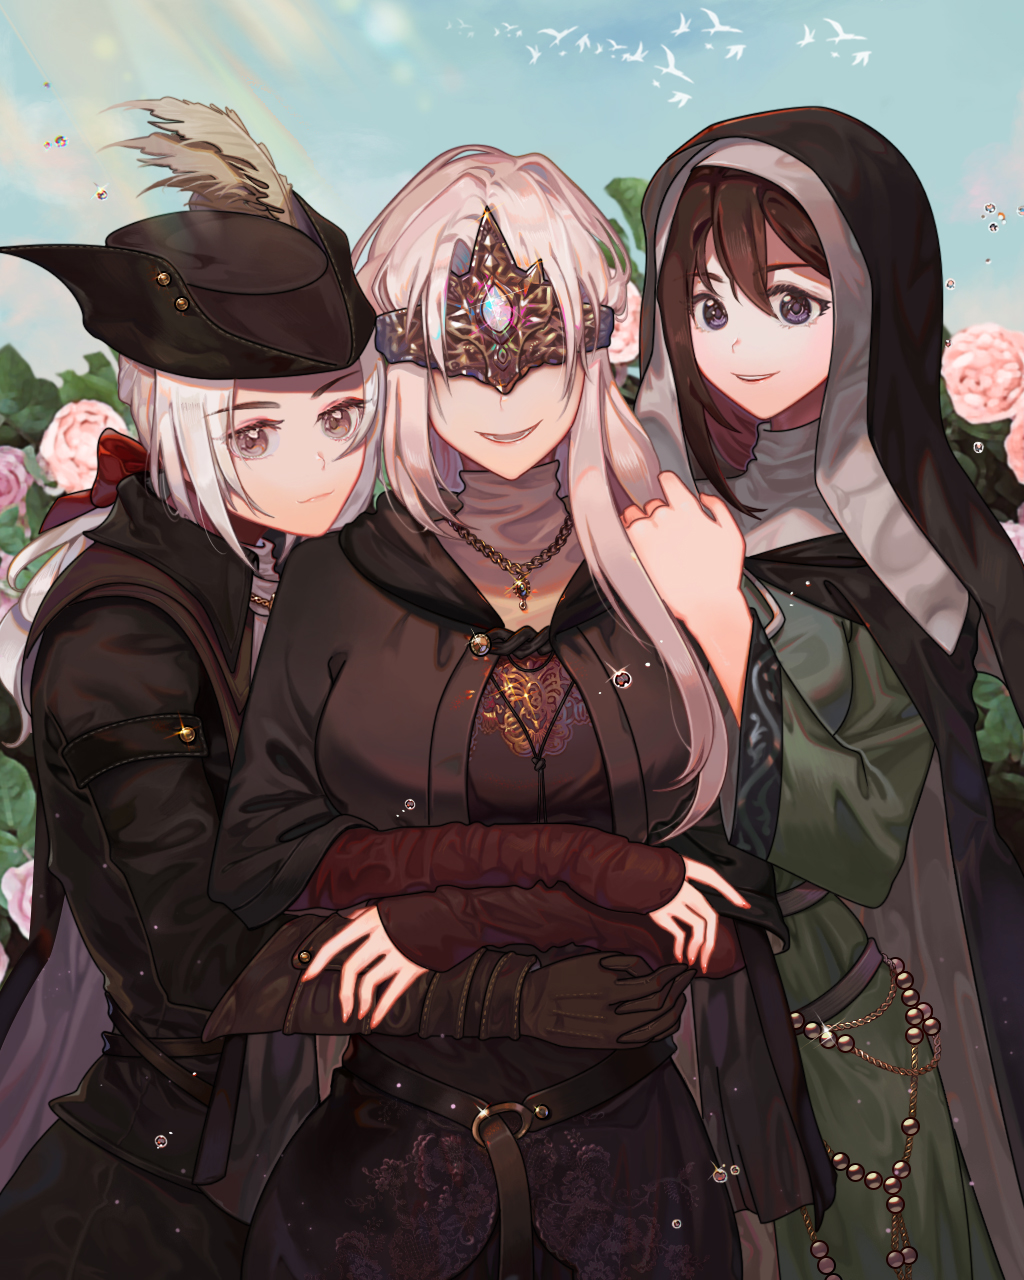 3girls armor ascot bandage black_hair blindfold blonde_hair bloodborne blue_eyes breasts cape capelet choker cloak covered_eyes dark_souls_iii demon's_souls dress fire_keeper from_software gloves hat hat_feather highres hug jewelry lady_maria_of_the_astral_clocktower lips long_hair looking_at_viewer maiden_in_black mask multiple_girls necklace peach_luo ponytail short_hair simple_background smile souls_(from_software) the_old_hunters tricorne white_hair